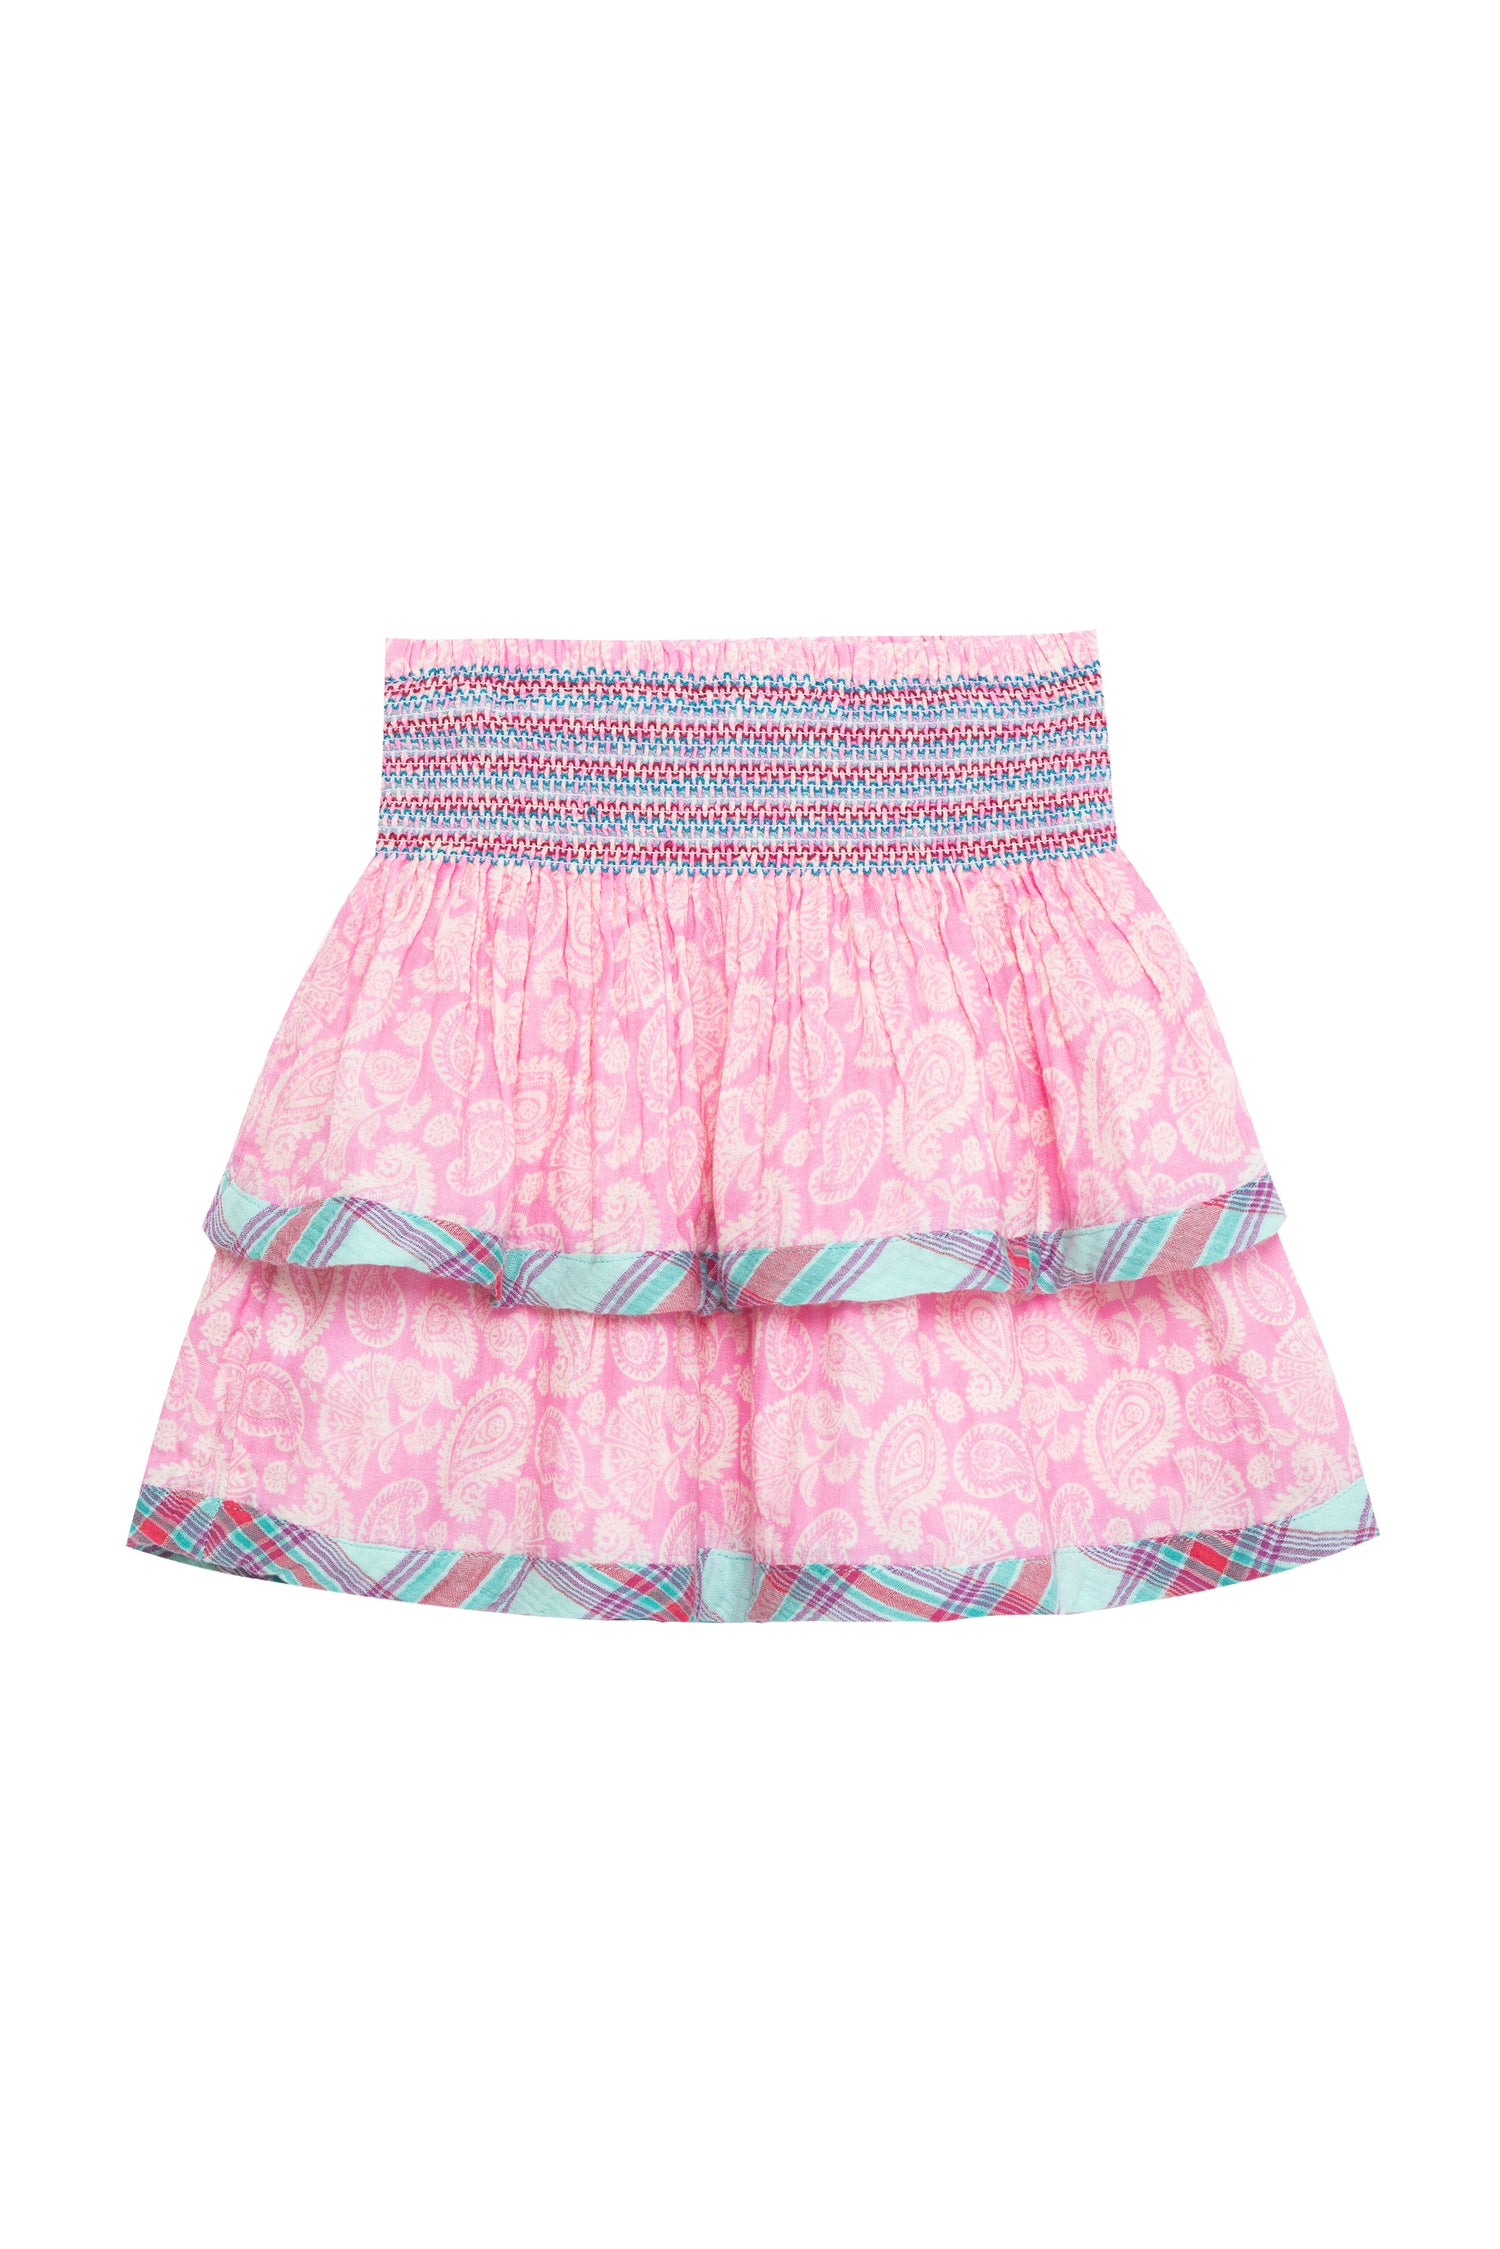 Back view of tiered gauze skirt featuring mixed paisley and plaid patterns, as well as a smocked waist